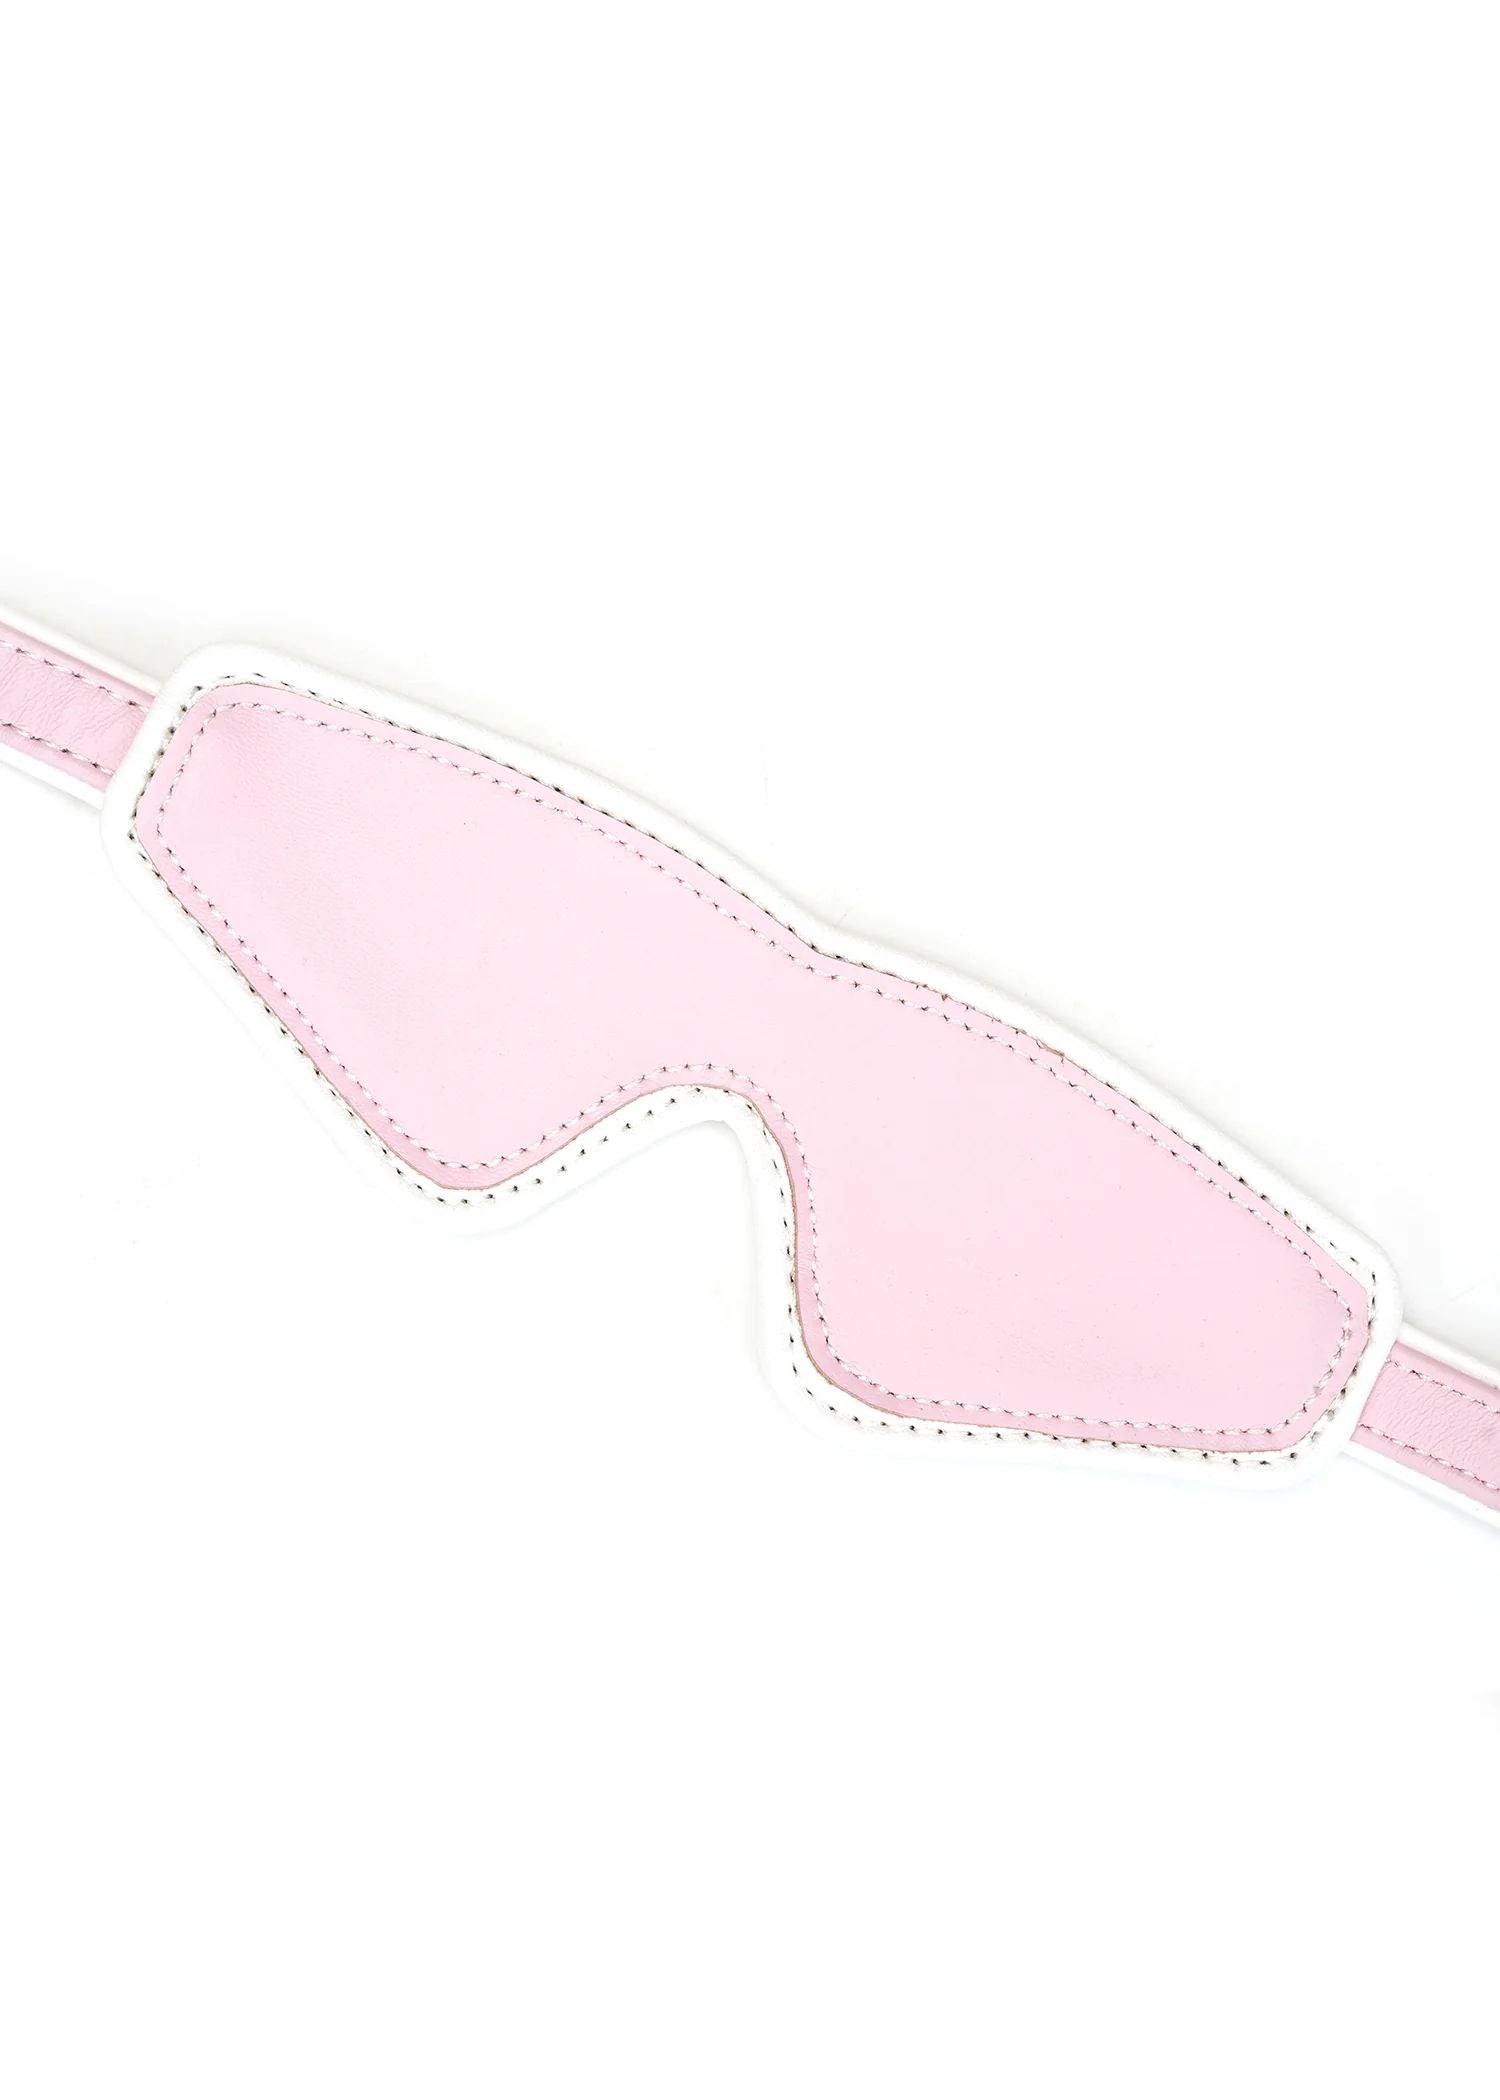 Liebe Seele Fairy Blindfold (White & Pink) | Avec Amour Leather Accessories